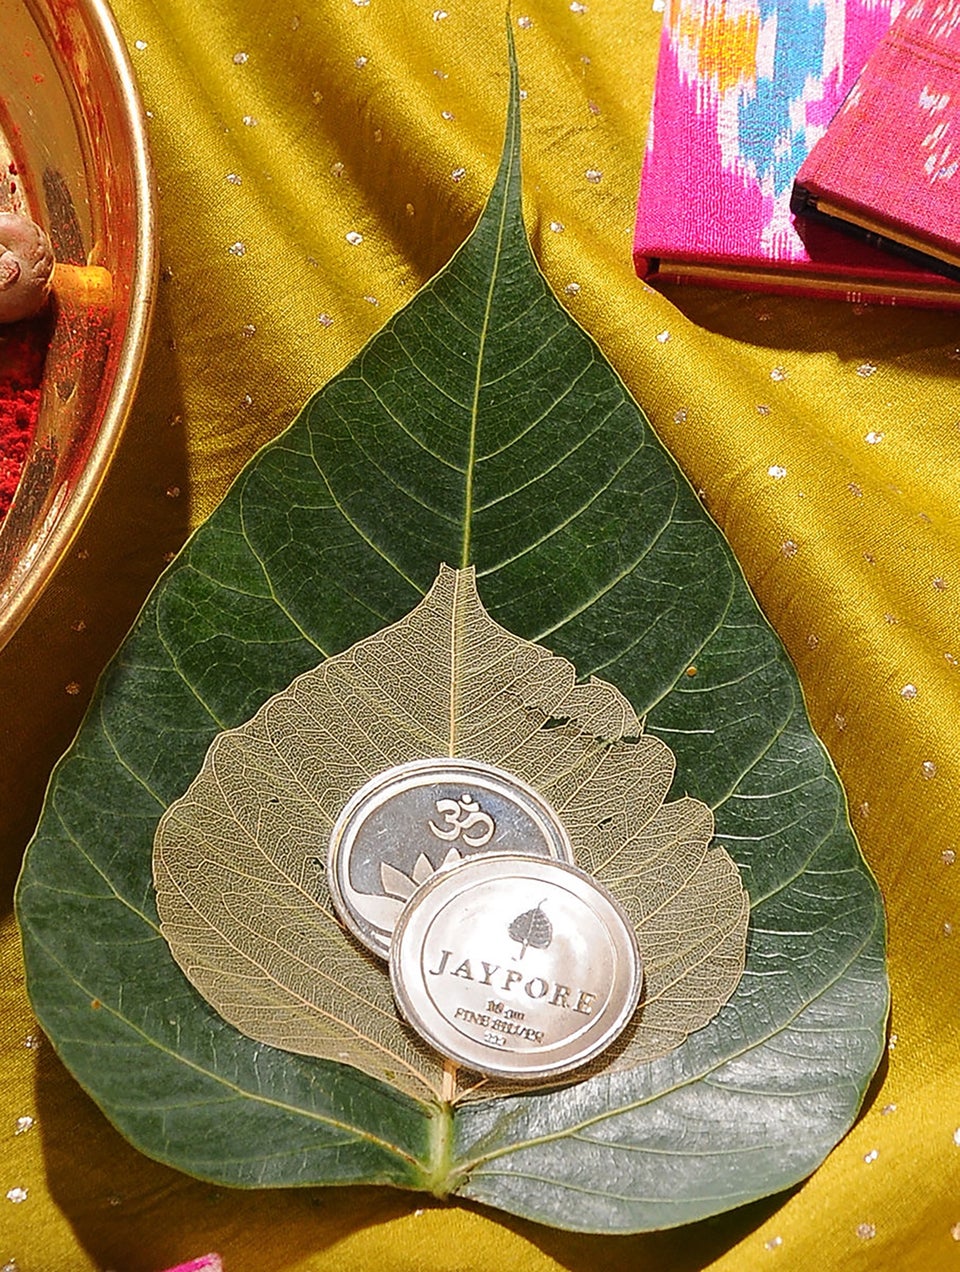 Women Lotus With Om Silver Coin